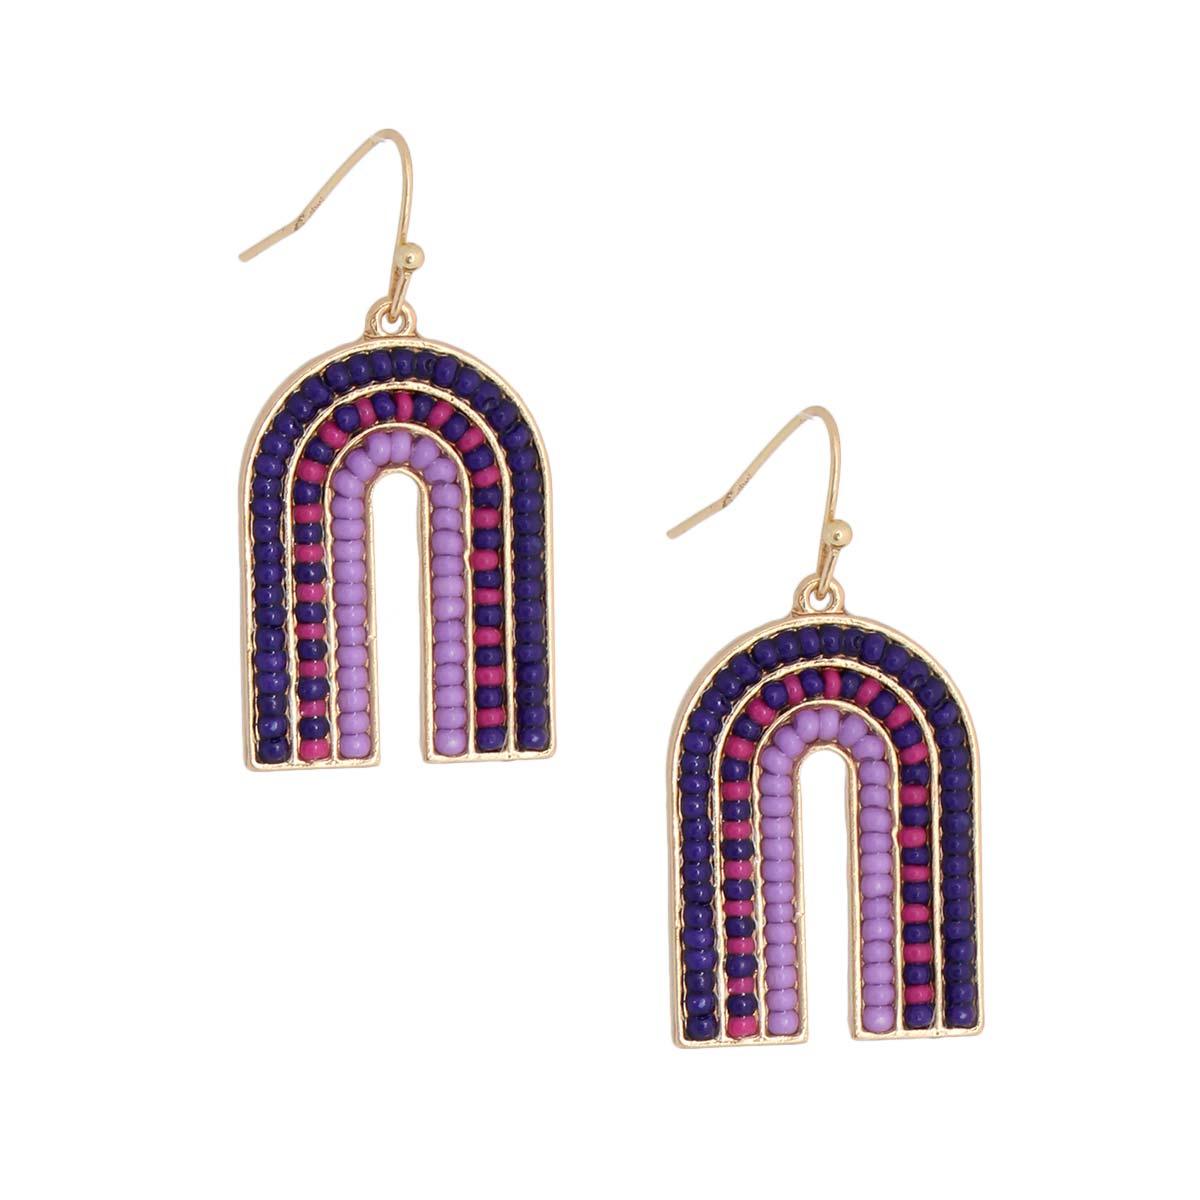 Get Noticed with Purple Seed Beaded Arch Earrings - Shop Now!